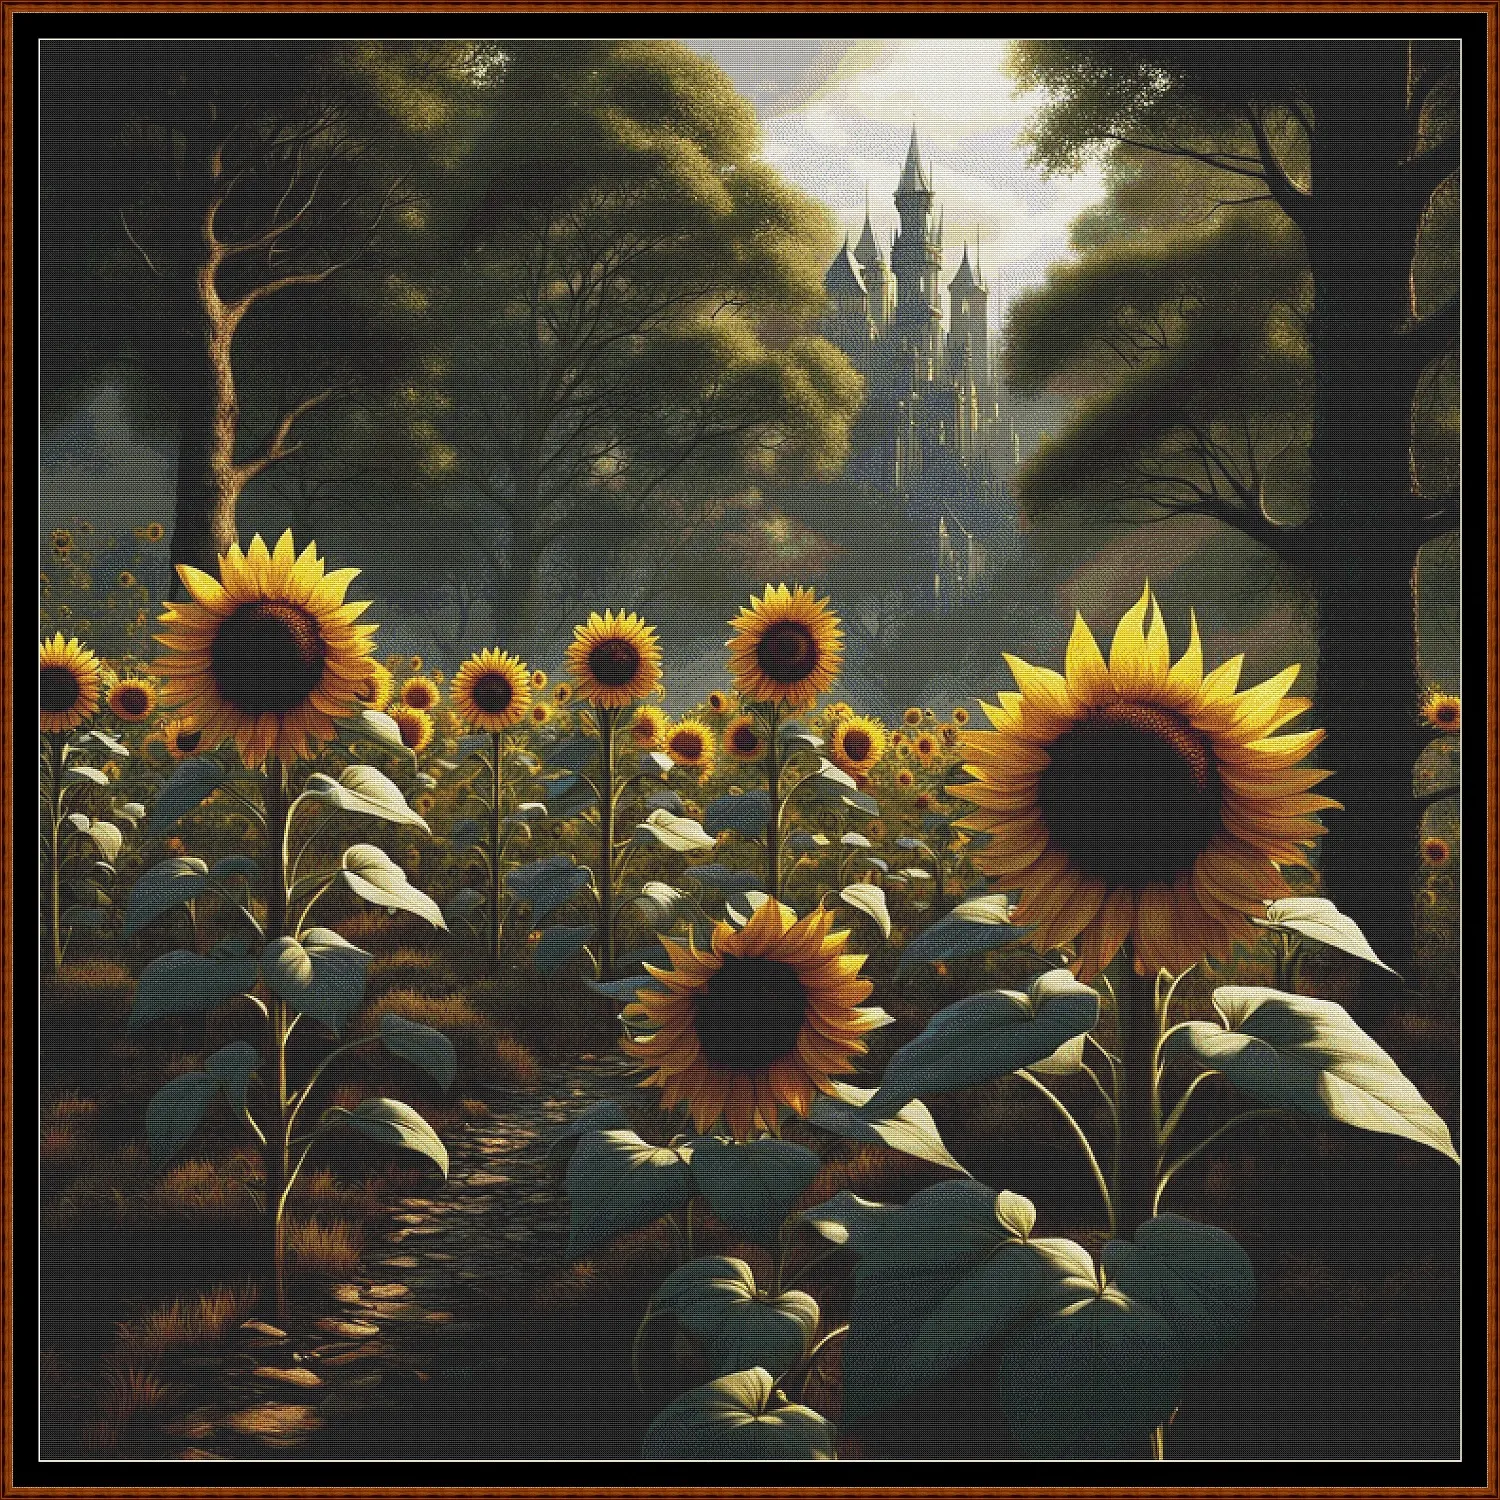 Expertly created from art by Mike Singleton, under Public Domain CC0 license, Sunflowers cross stitch patterns.